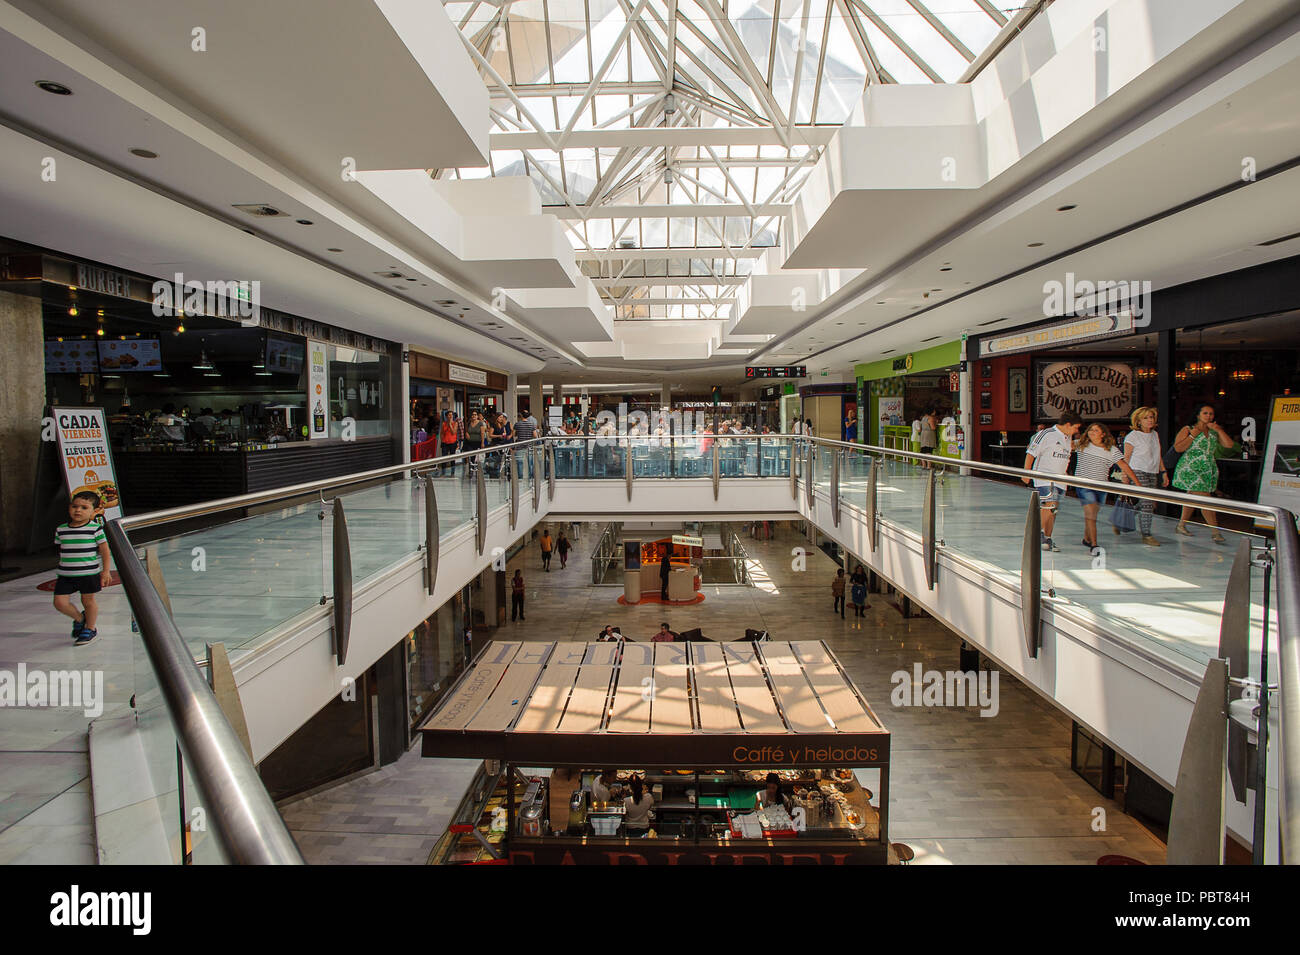 MADRID, SPAIN - JUN 19, 2014: Interior of the commercial centre La Vaguada  in Madrid, Spain. It was the first coomercial centre in the capital, opened  Stock Photo - Alamy